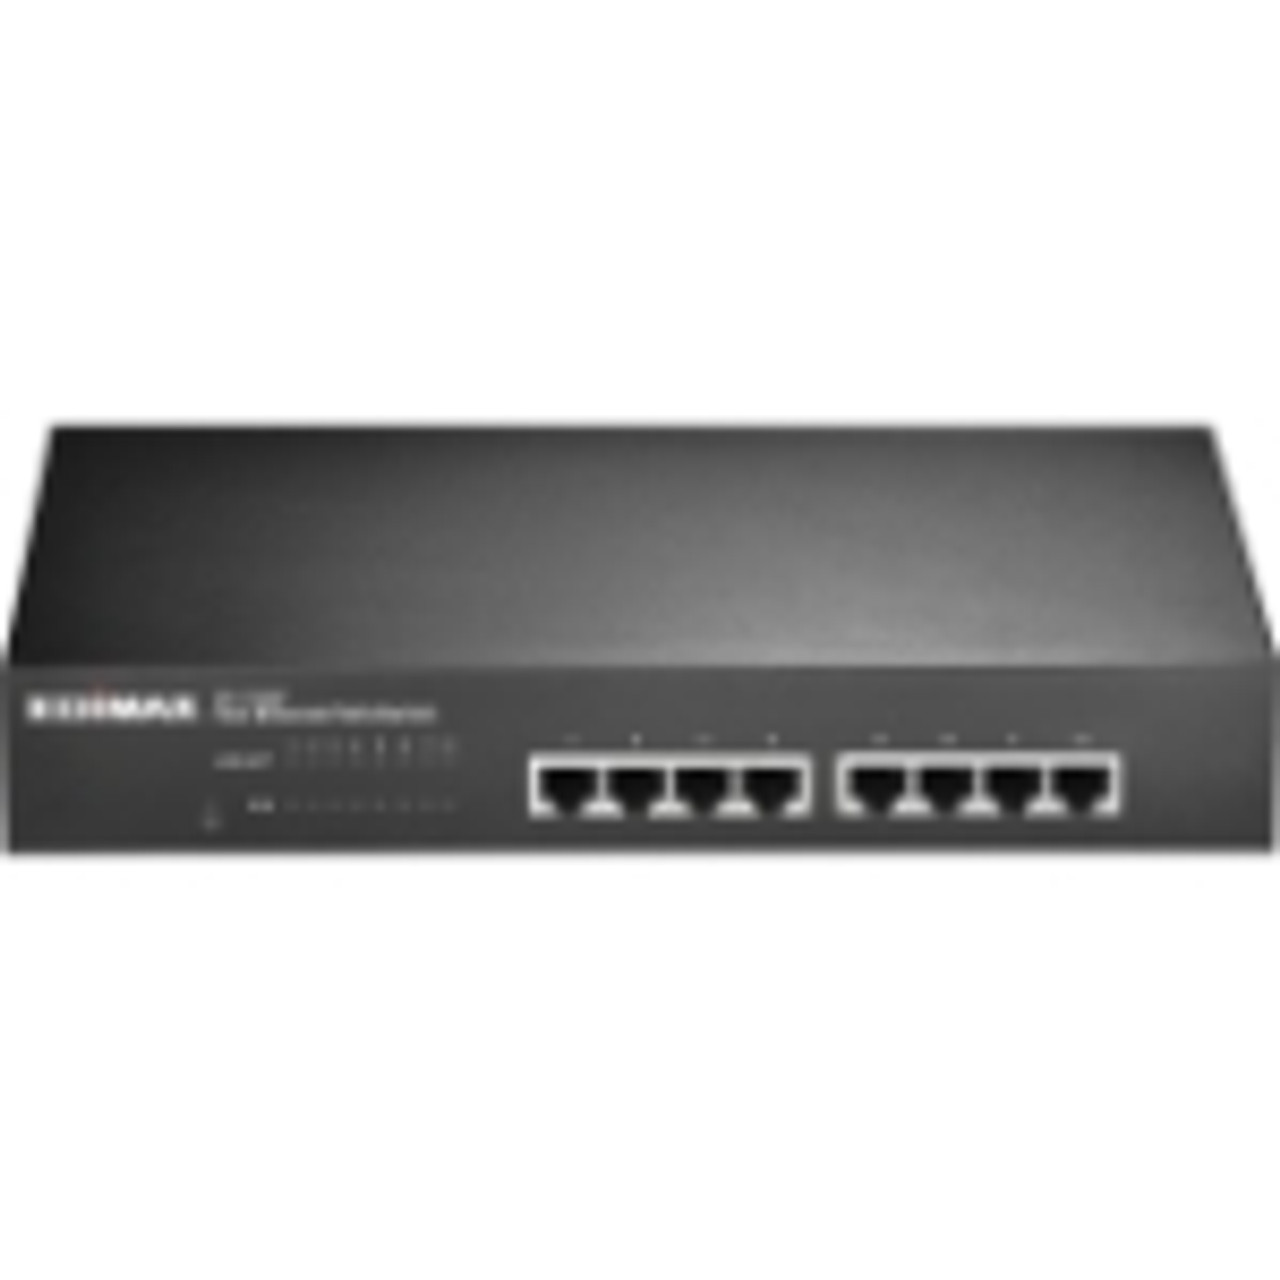 ES-1008P Edimax 8-Ports Fast Ethernet PoE+ Switch 8 Ports 100Base-TX 8 x Network Twisted Pair Fast Ethernet 2 Layer Supported Desktop Rack-mountable (